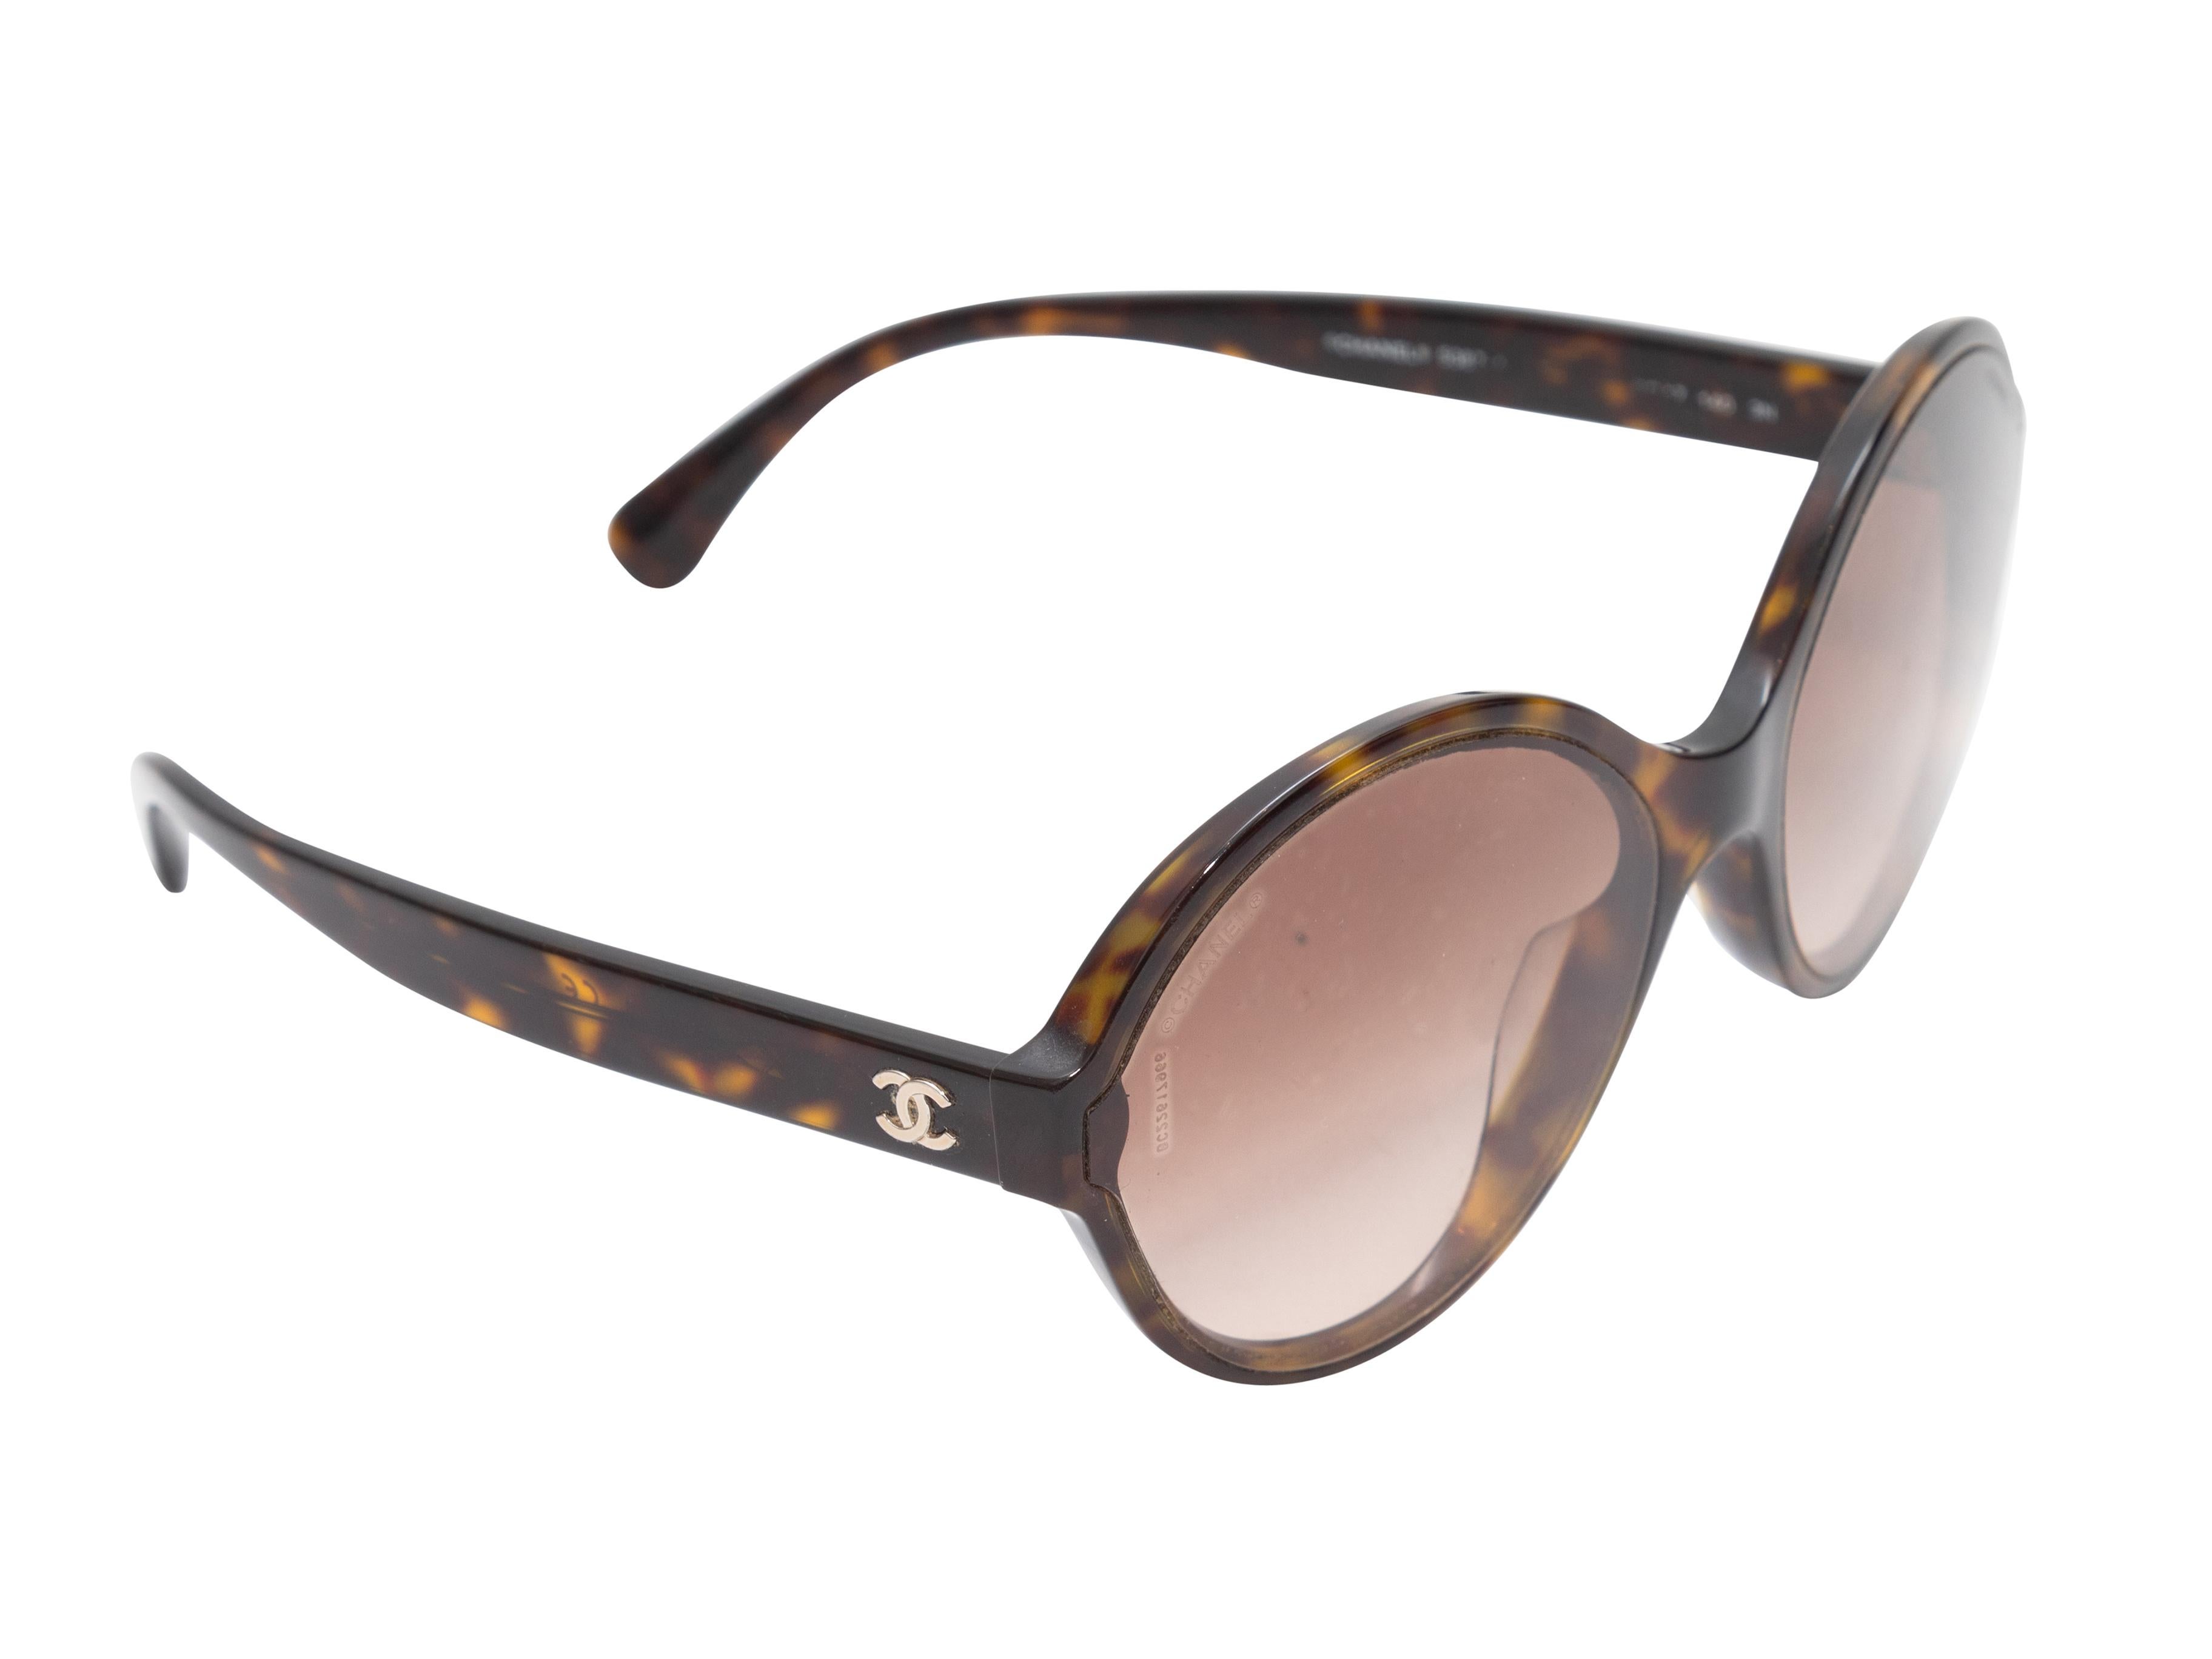 Tortoiseshell oversized round sunglasses by Chanel. Brown tinted lenses. 2